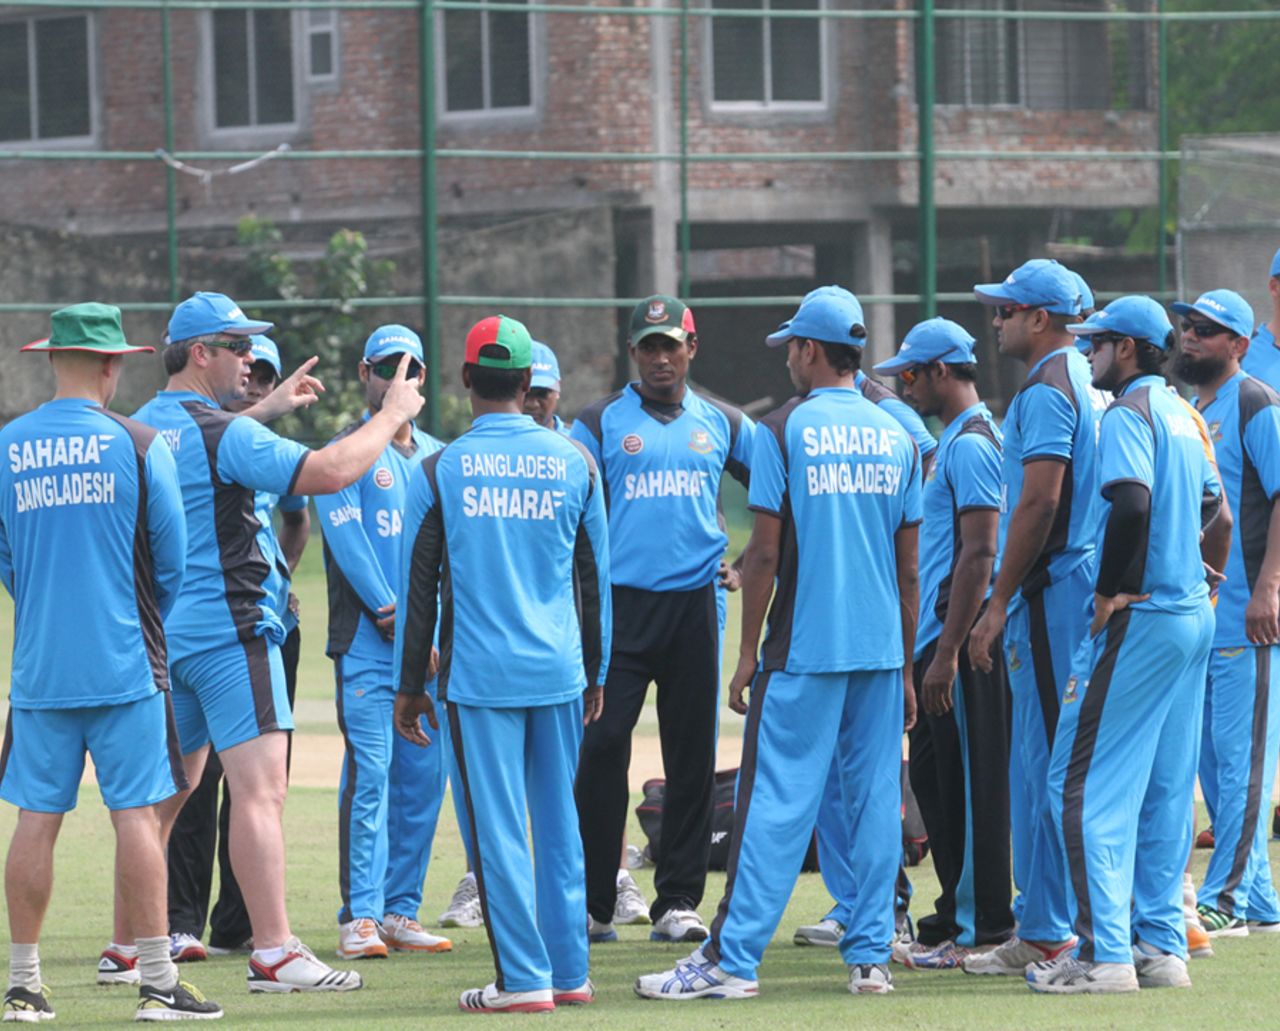 Bangladesh players are instructed by fielding coach Jason Swift ahead of a training session, Mirpur, August 25, 2012